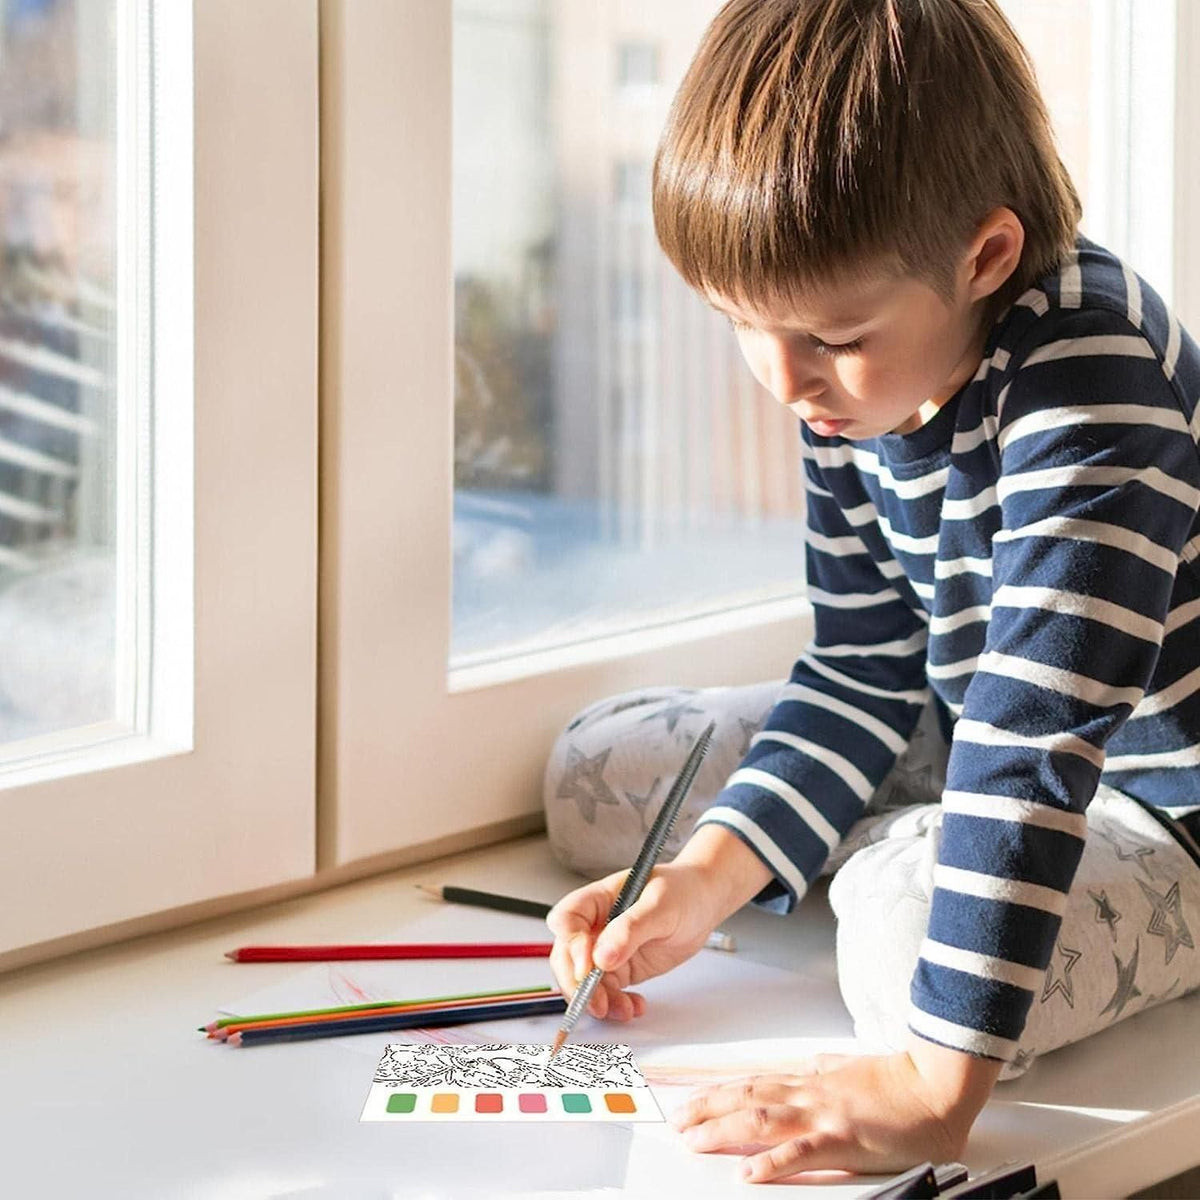 Pocket Watercolor Painting Book: Keep Your Child Away From Harmful Mobile Devices (BUY 1 GET 1 FREE)